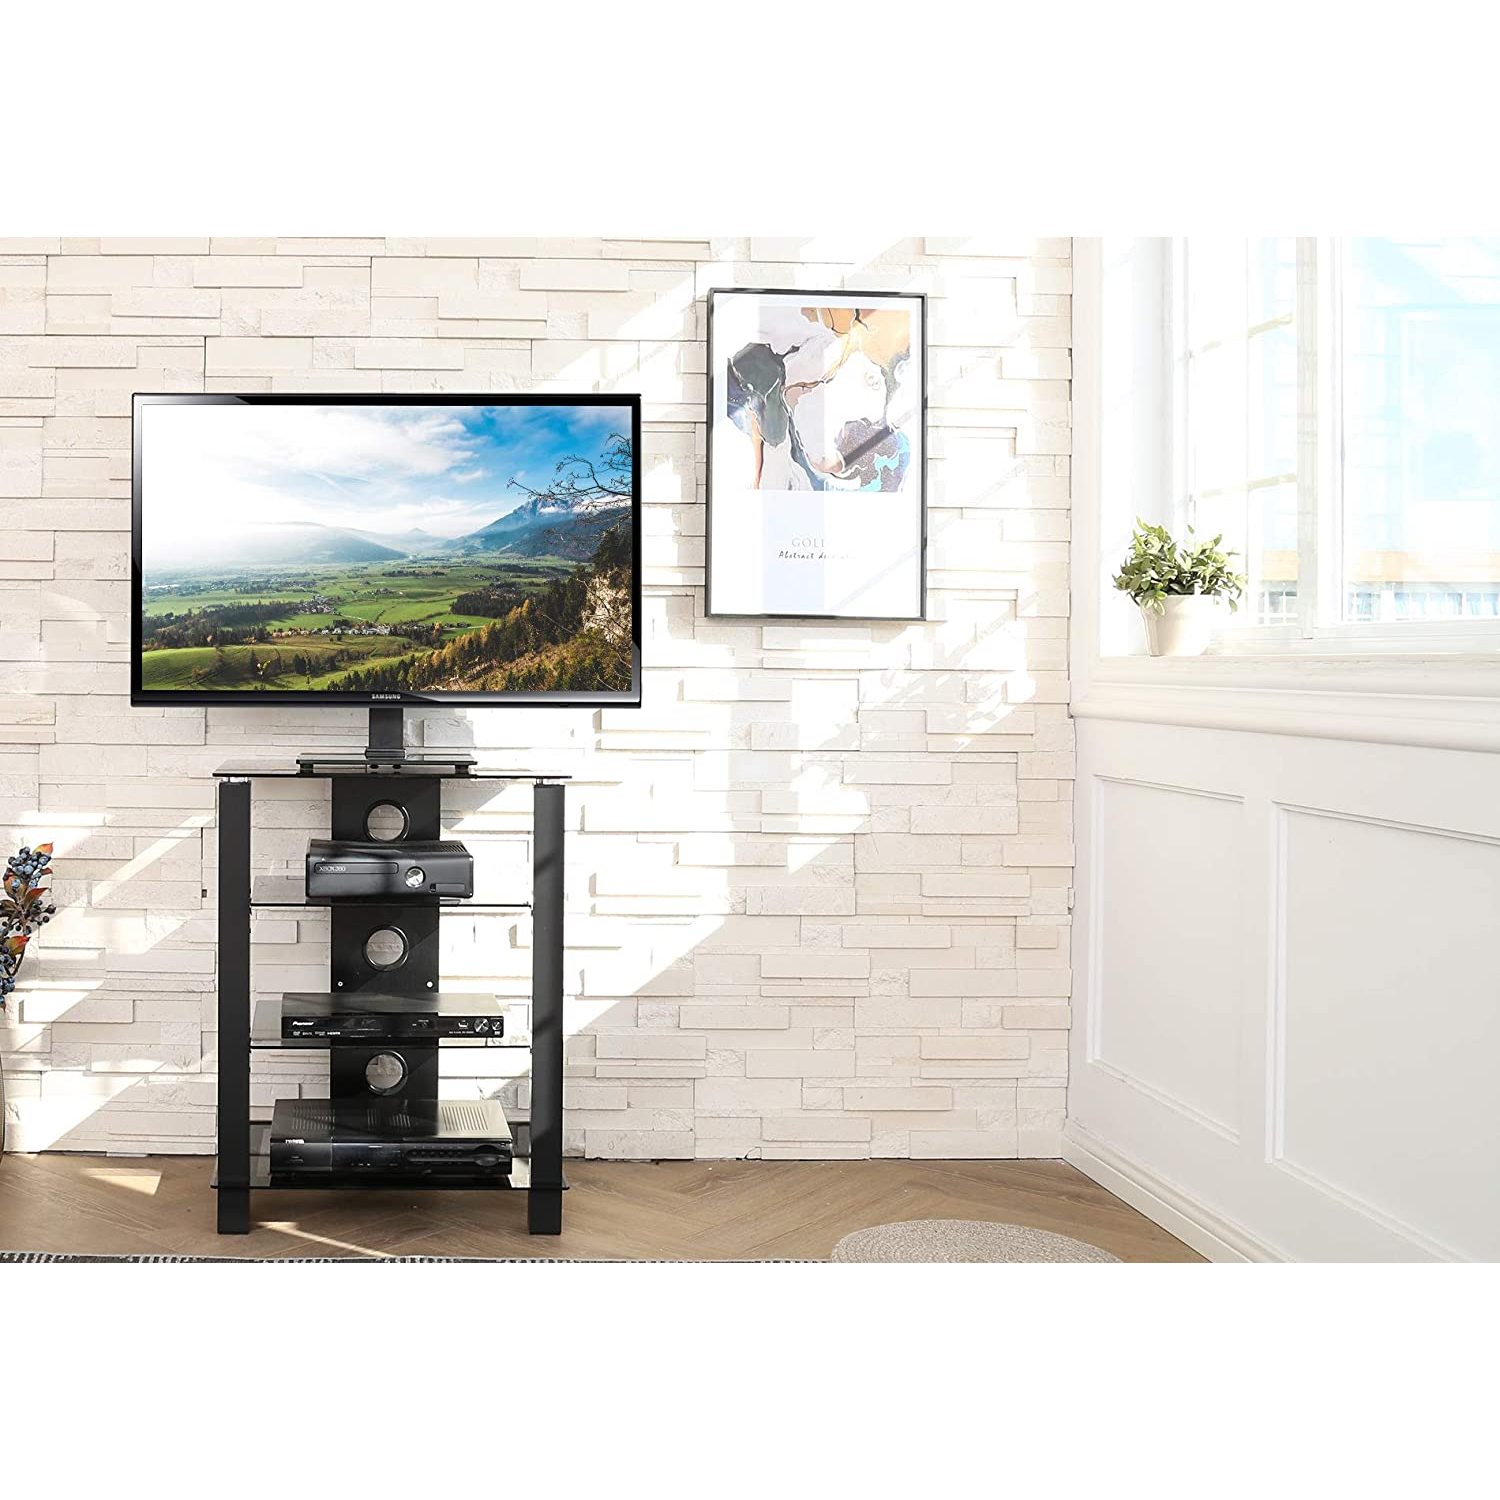 Bilot 4-Tier AV Media Cabinet Stand Component Cabinet, Gaming TV Stand and Stereo Rack Audio Tower with Height Adjustable Tempered Glass Shelves, AS406003GB - image 3 of 8